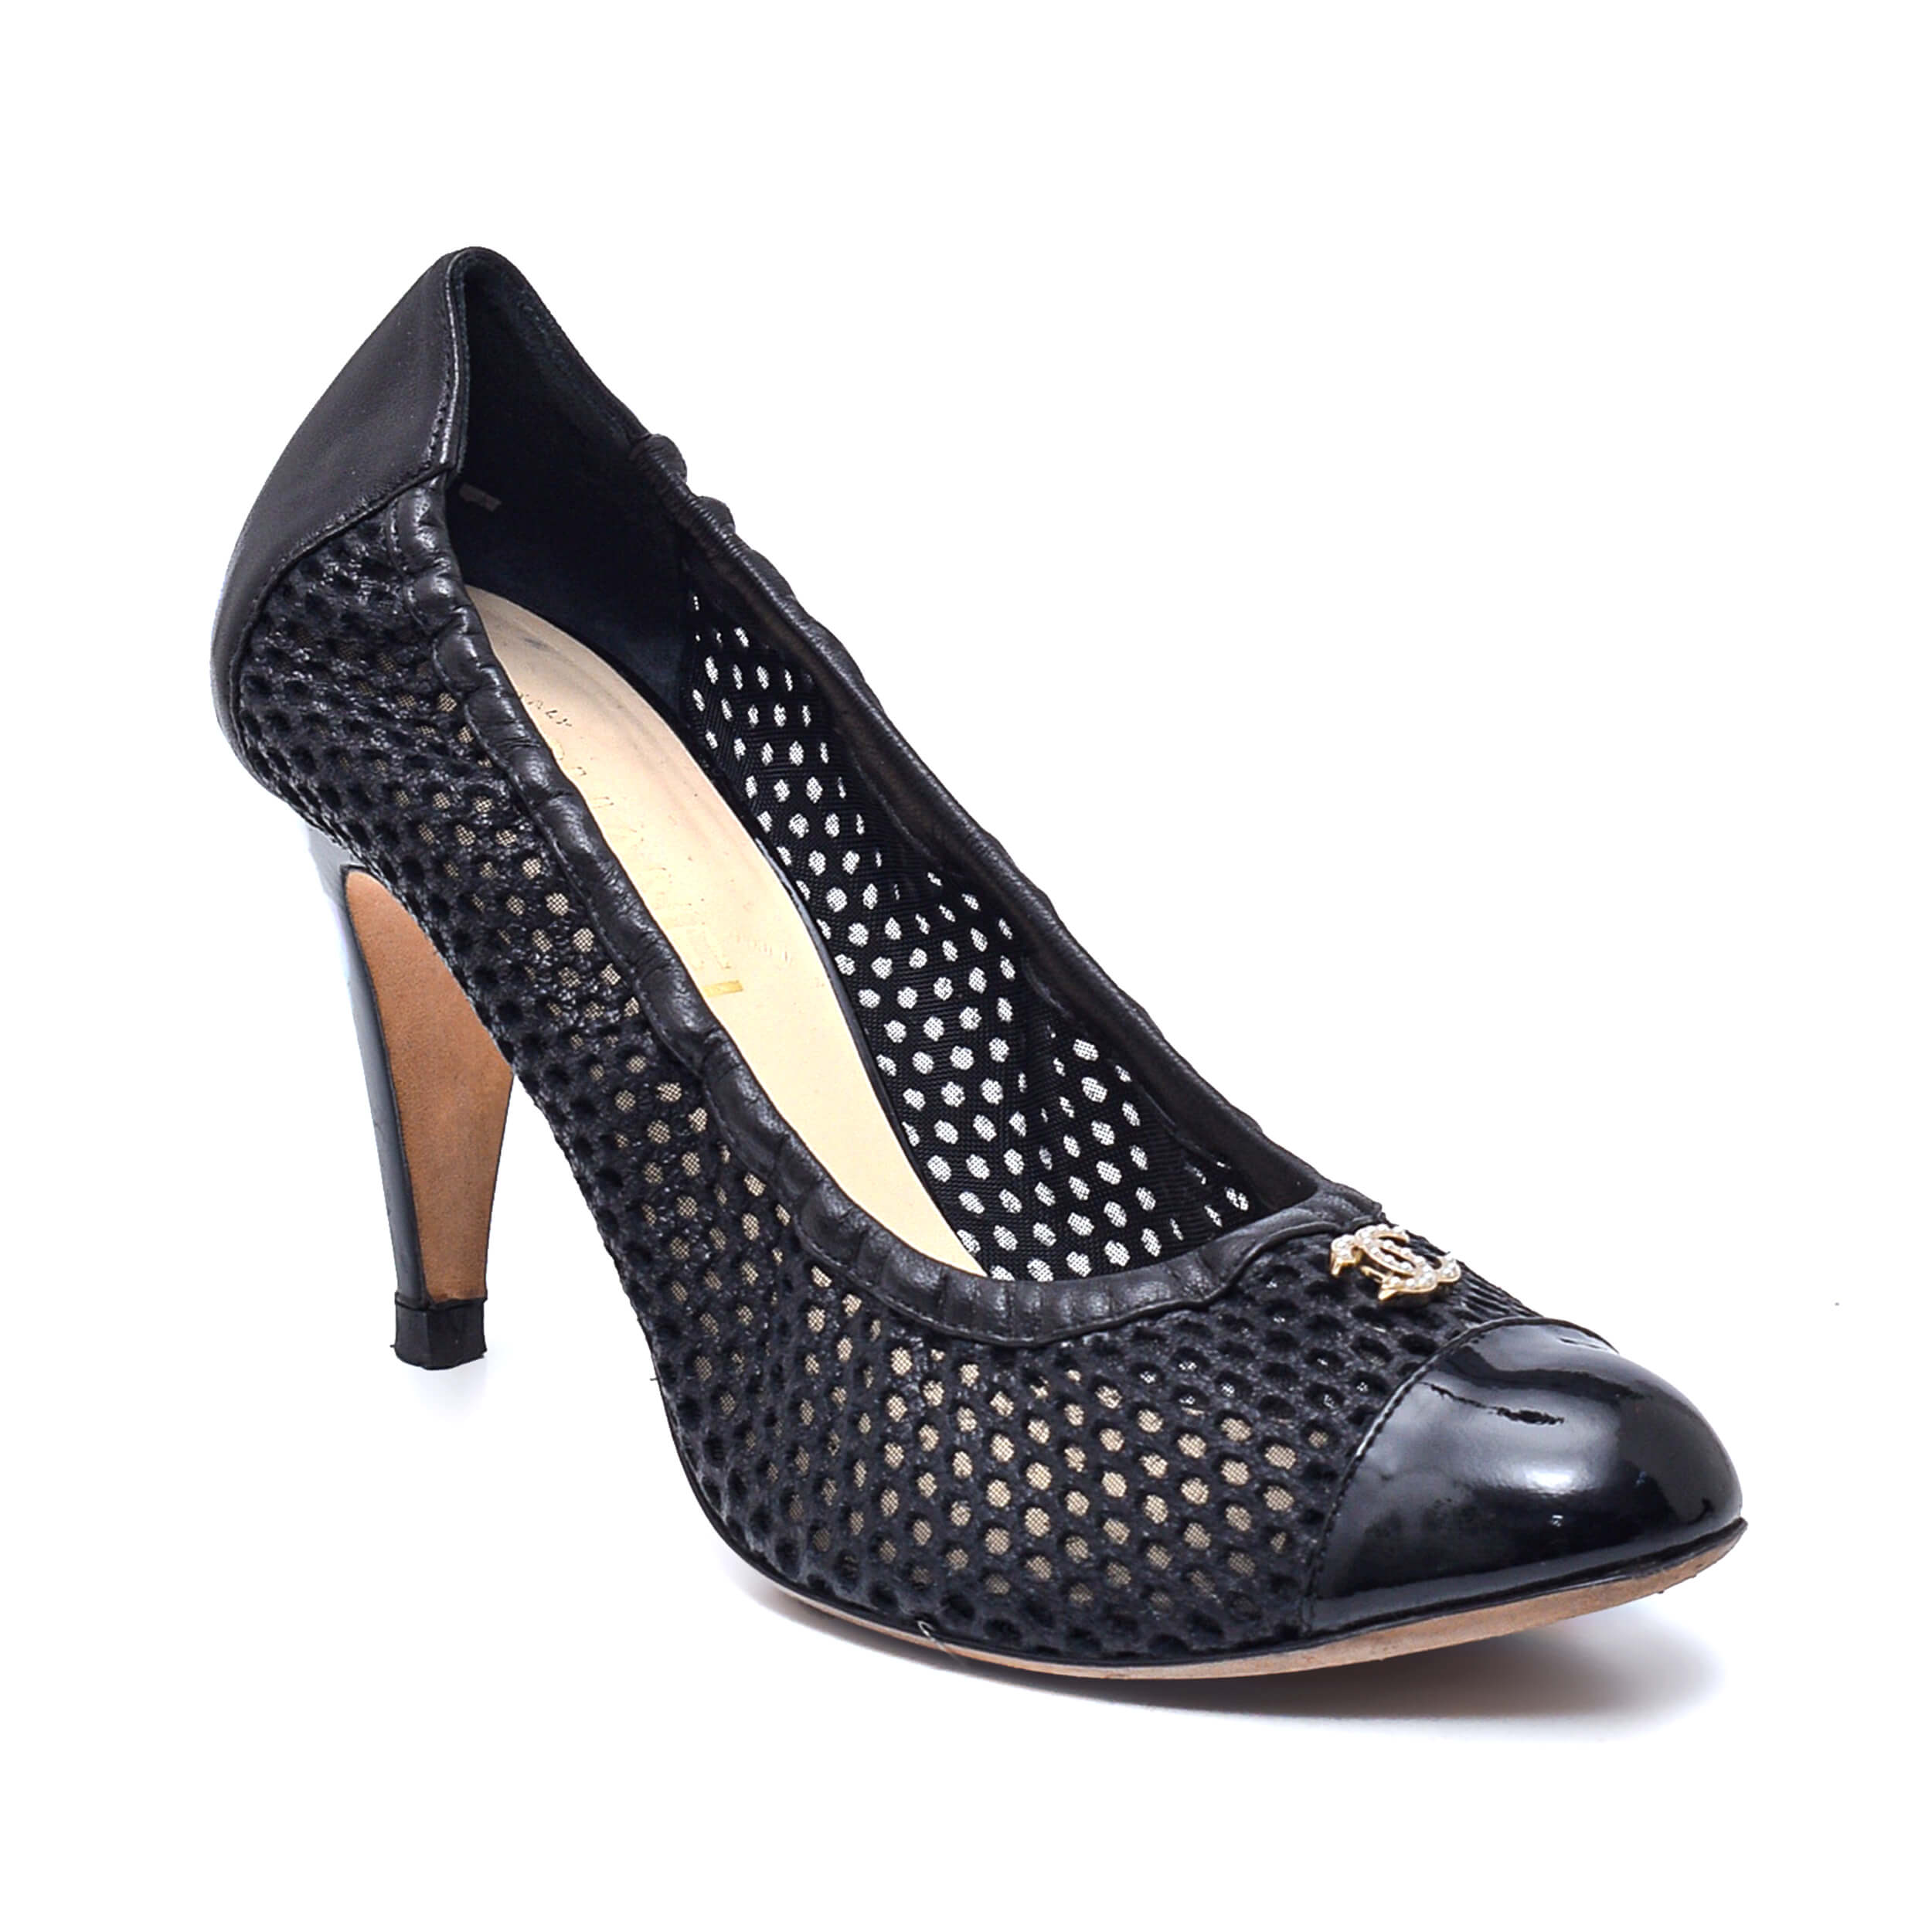 Chanel - Black Perforated Knit CC Pumps / 40